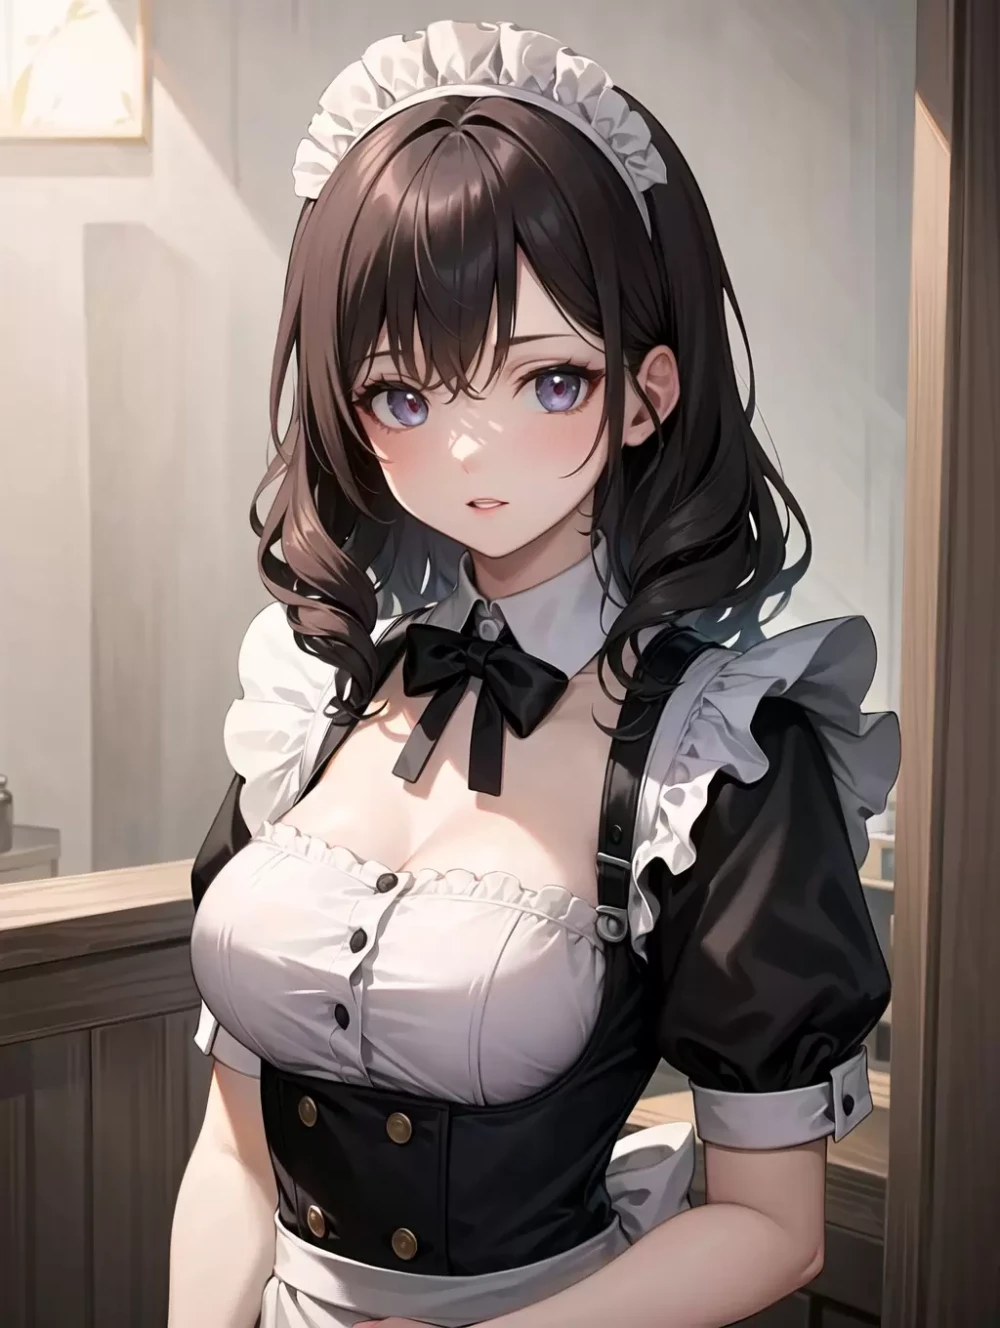 maid-anime-style-all-ages-9